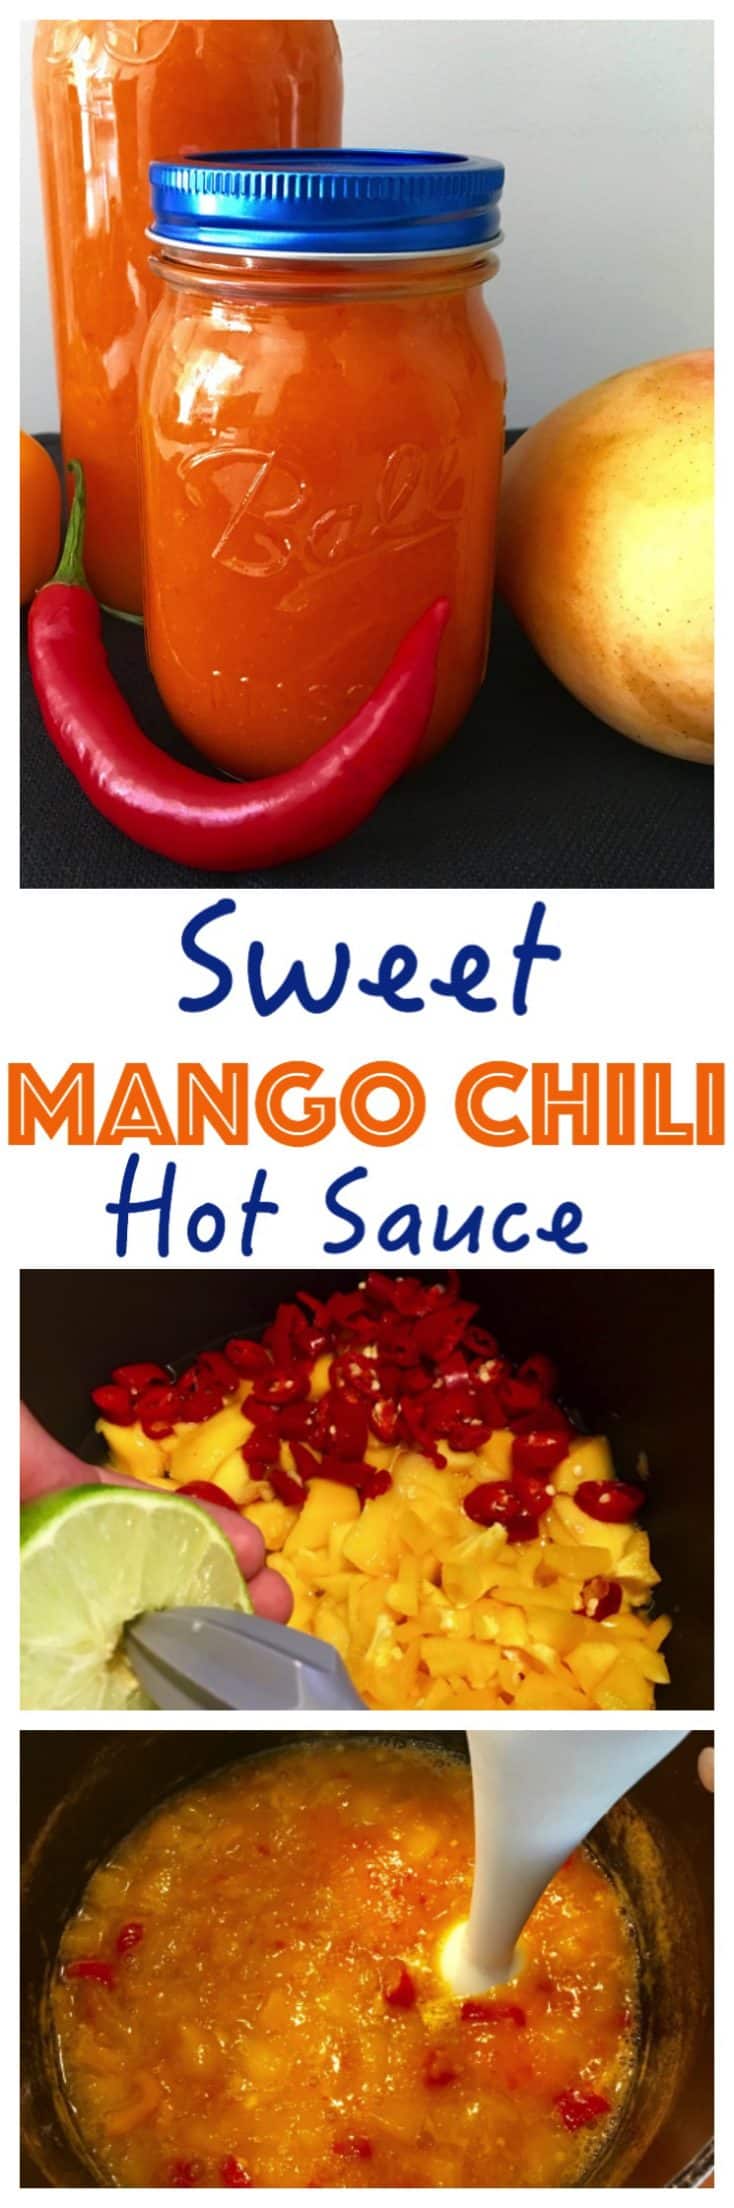 This Mango Chili Sauce is the perfect blend of sweet and spicy sauce. Delicious with seafood, chicken or pork, or as a dipping sauce. Easy to make with an explosion of tropical flavor, packs the perfect punch! Not too spicy, not too sweet but just right!